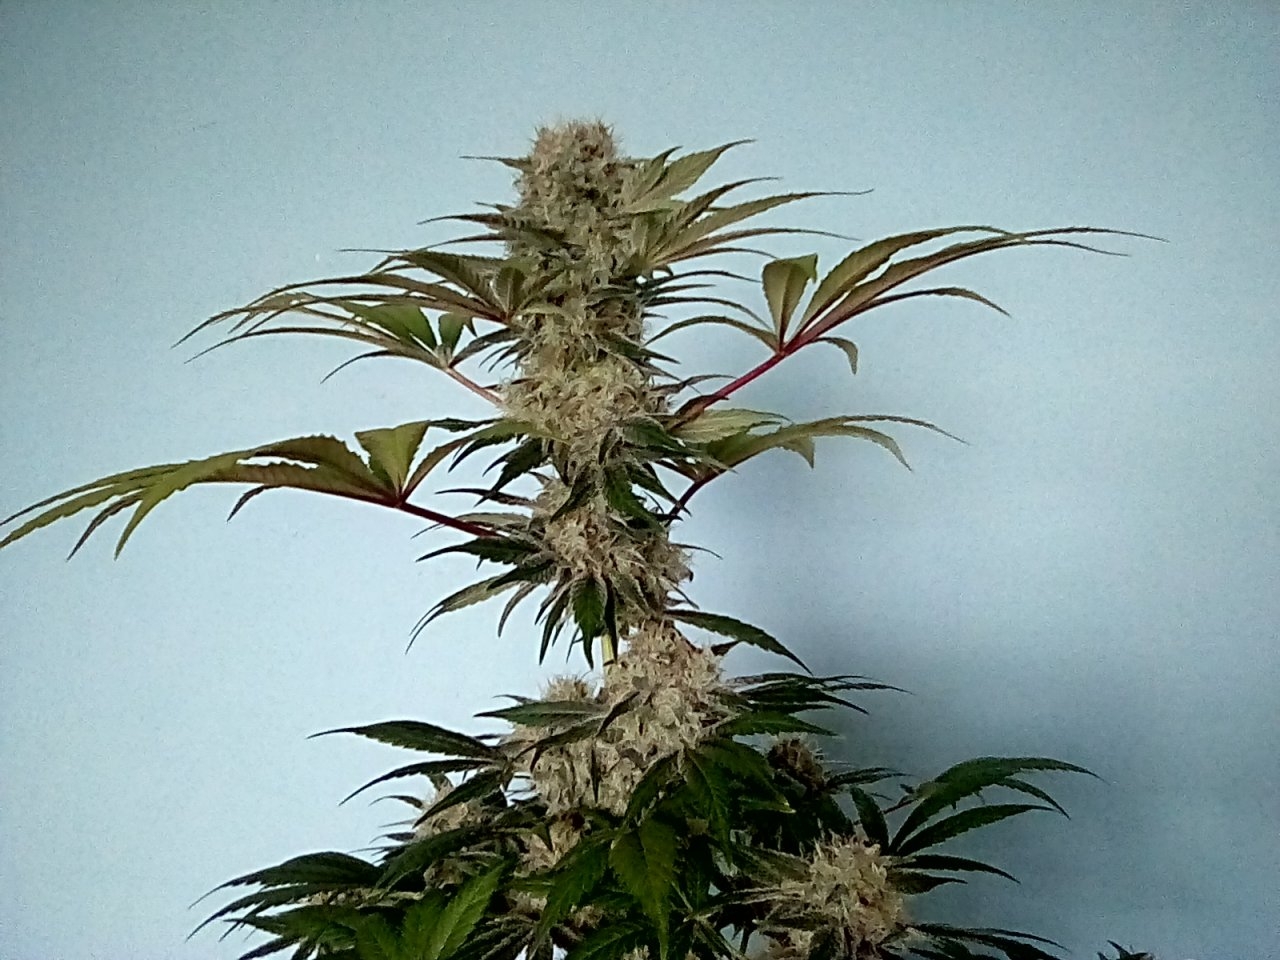 Day 56 of the flip Fruity Pebbles